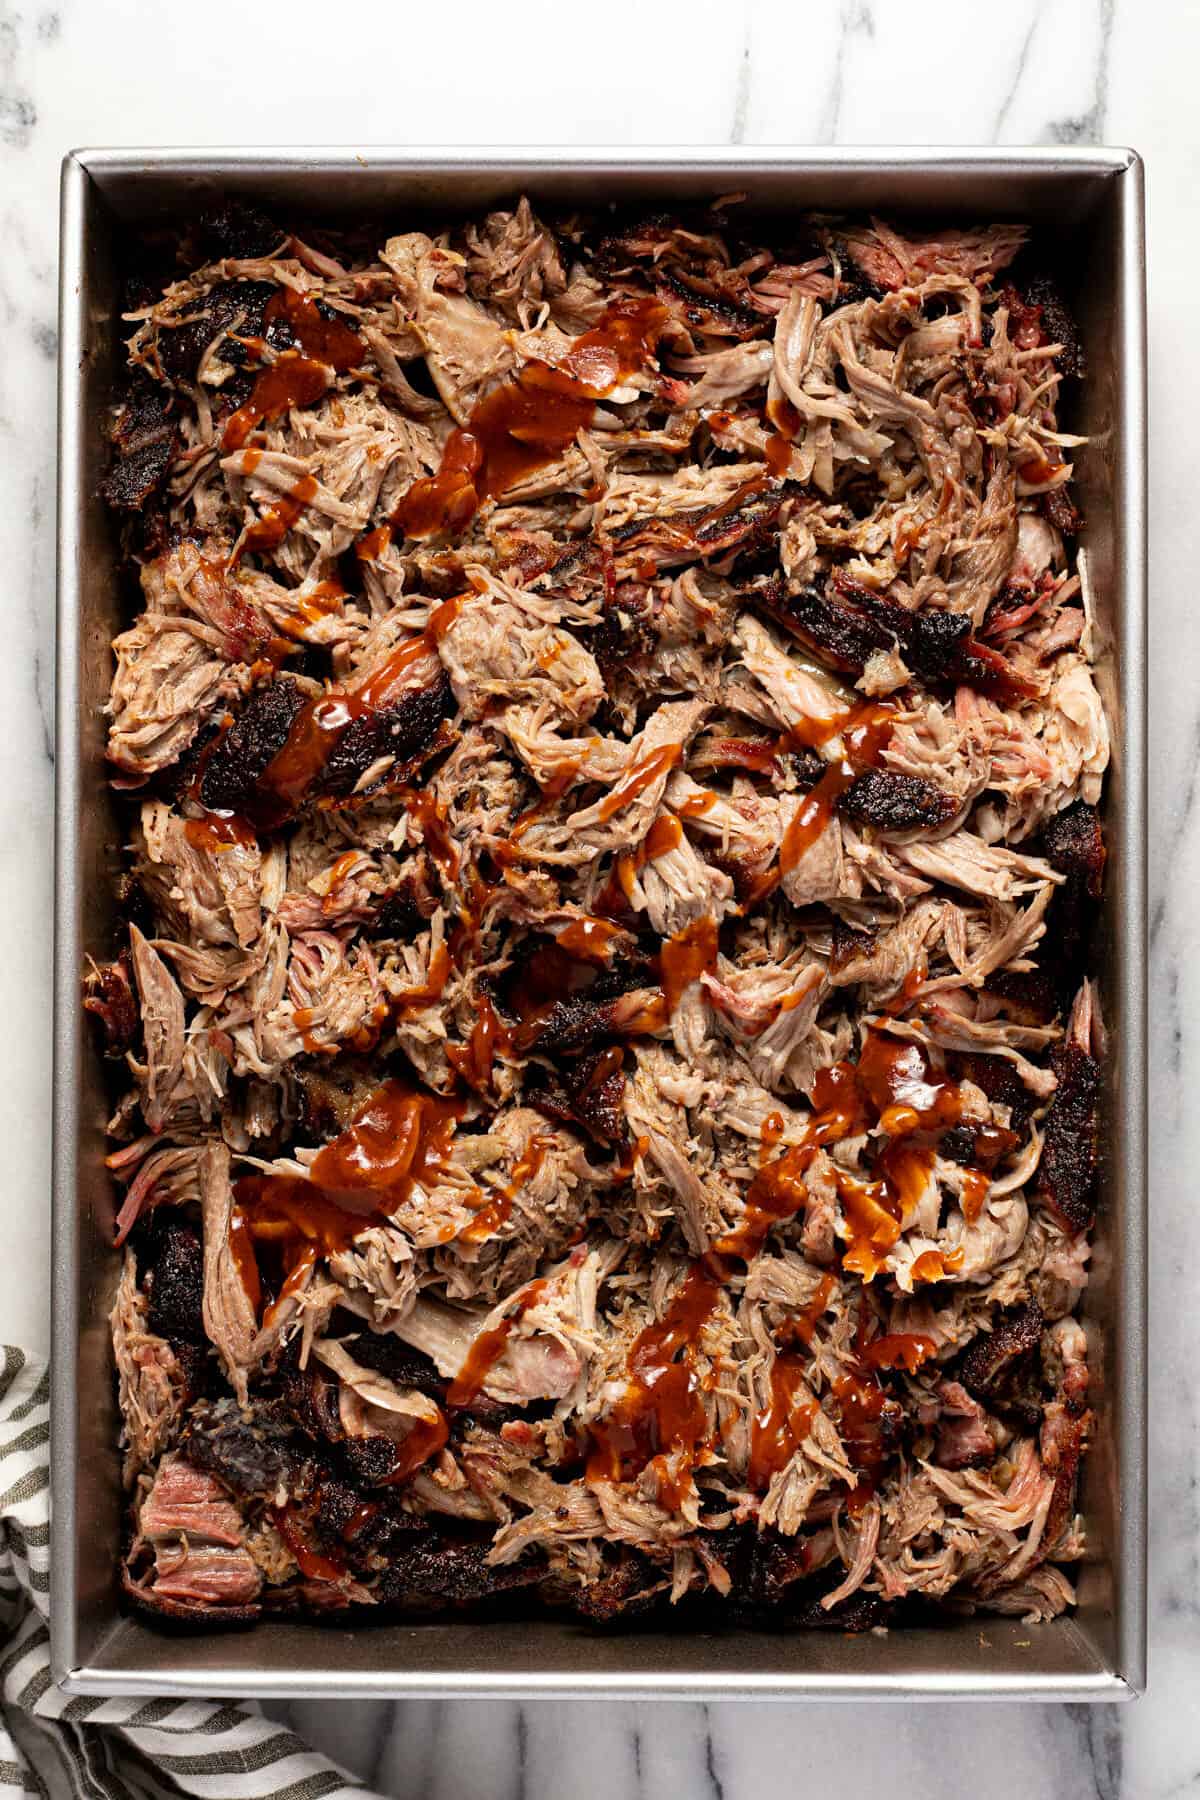 Large metal pan of shredded pork butt drizzled with BBQ sauce